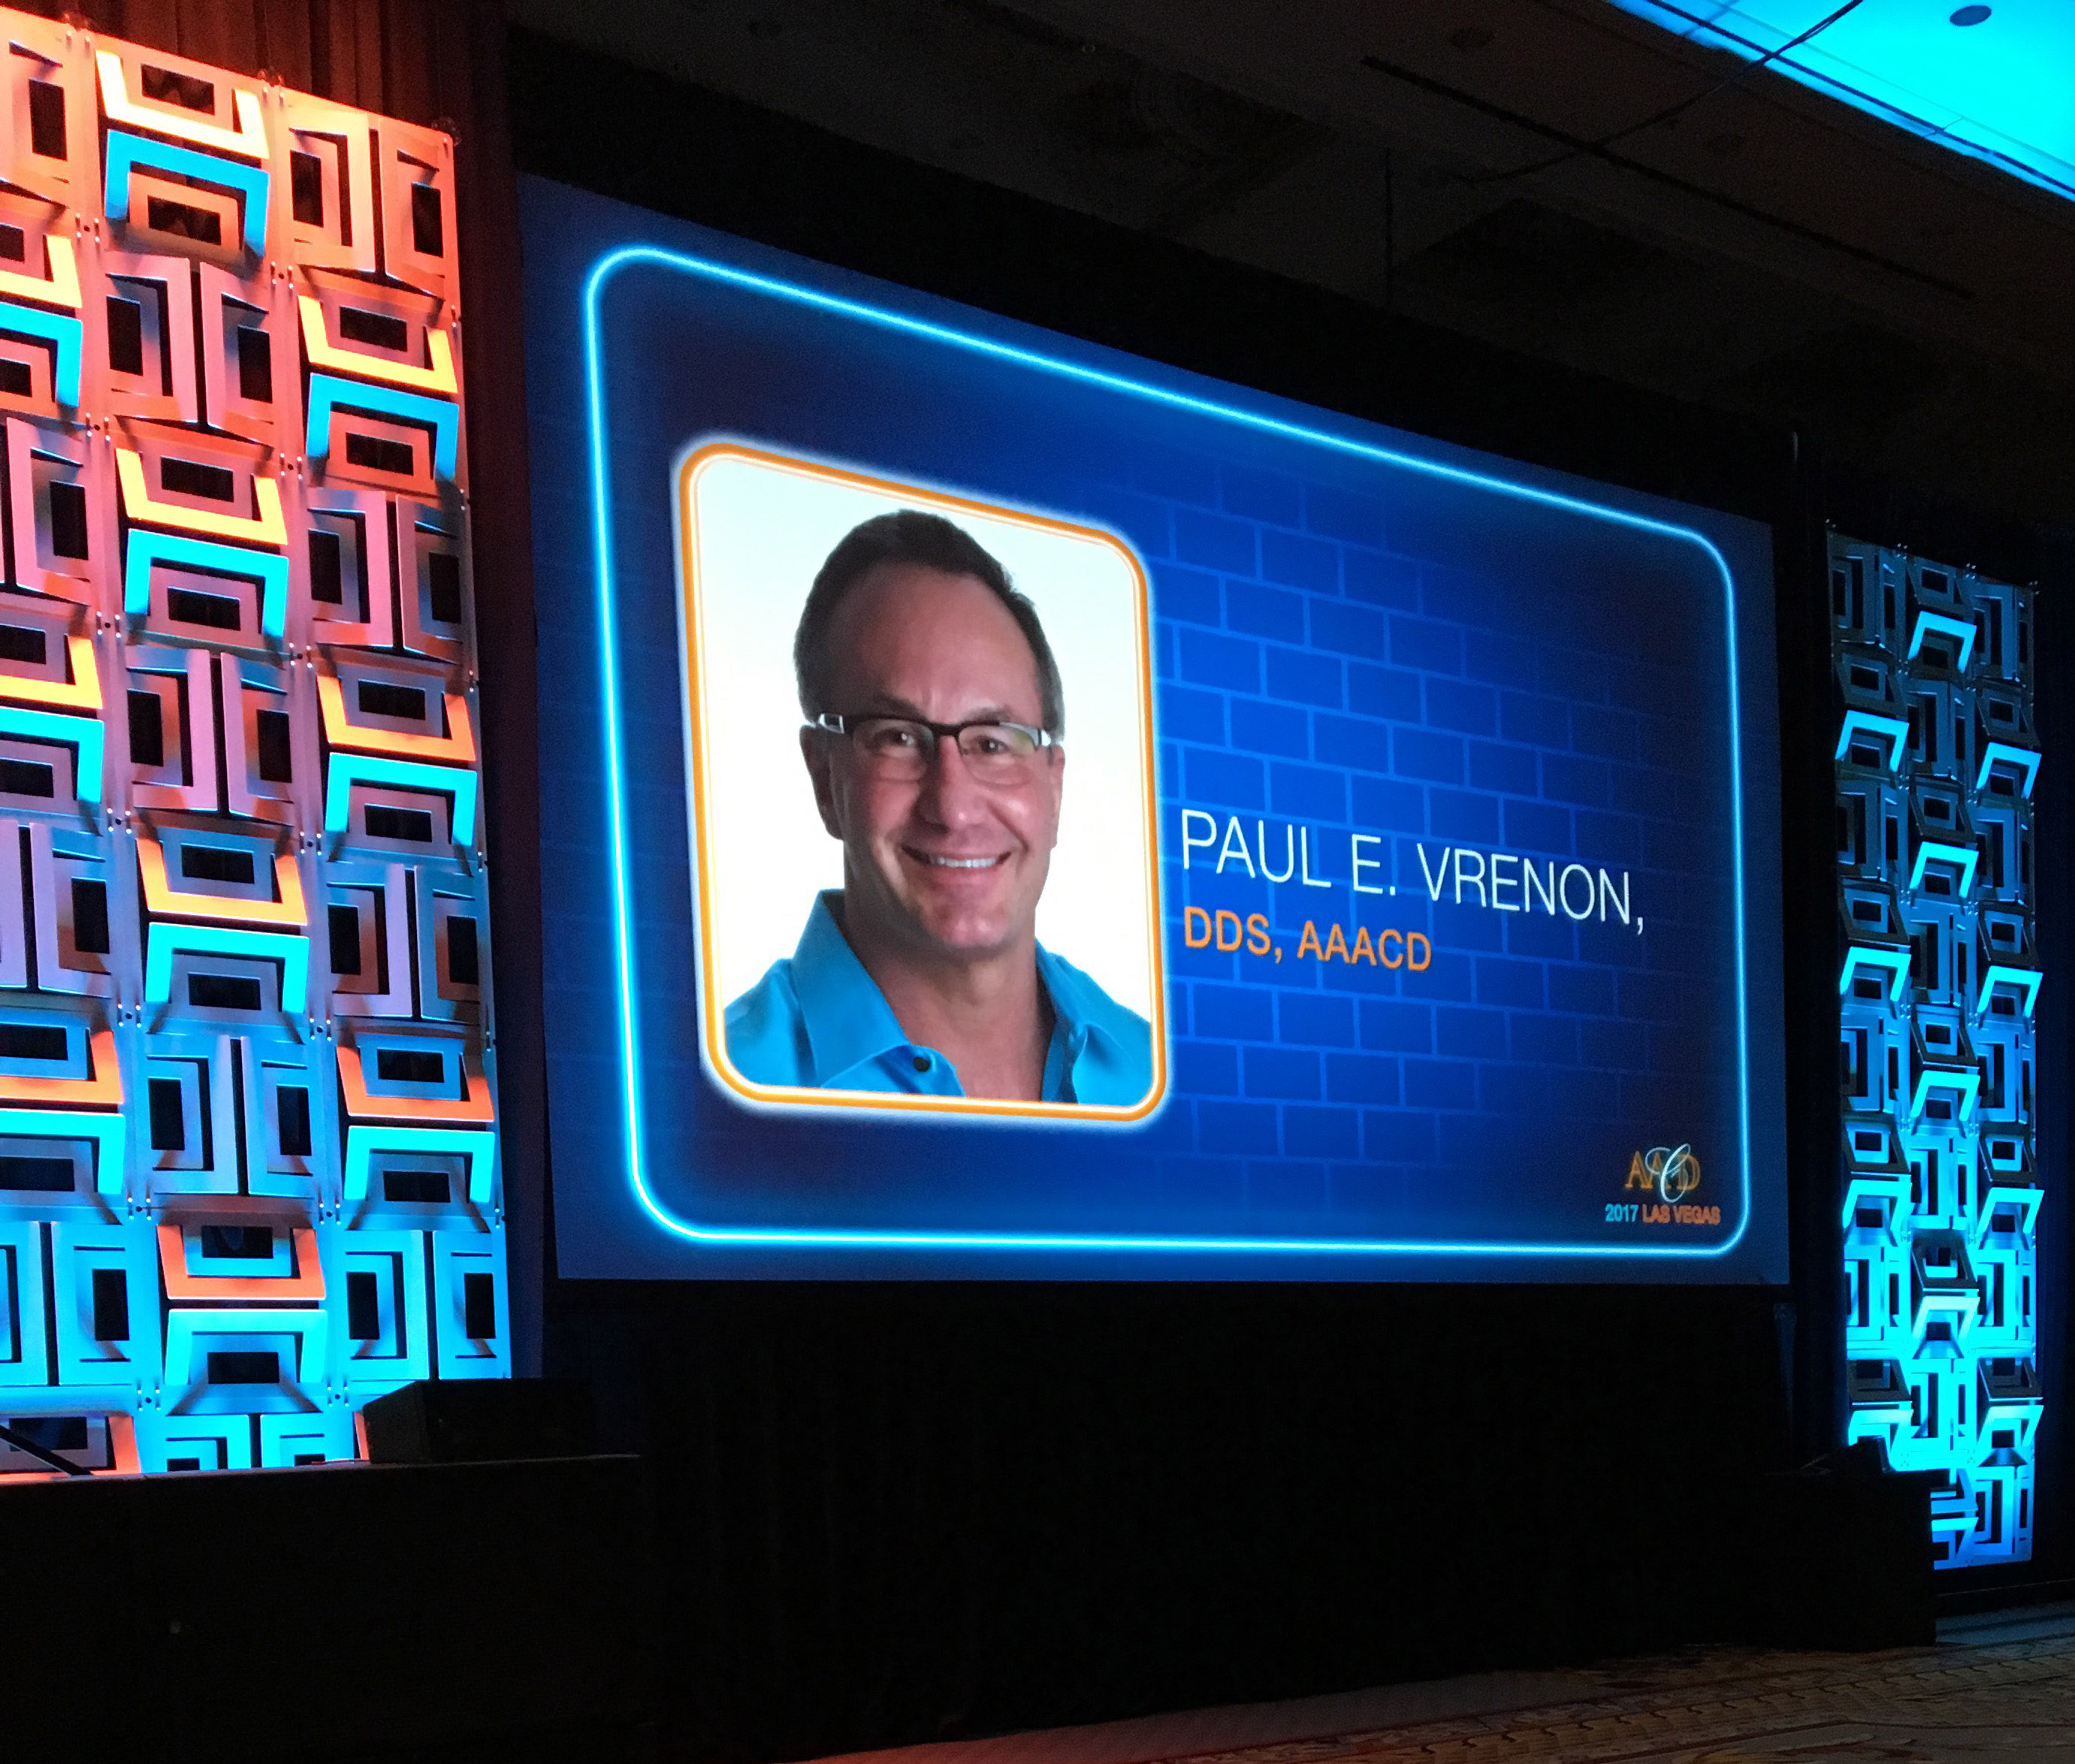 DR. PAUL VRENON TO RECEIVE AMERICAN ACADEMY OF COSMETIC DENTISTRY ACCREDITATION AWARD